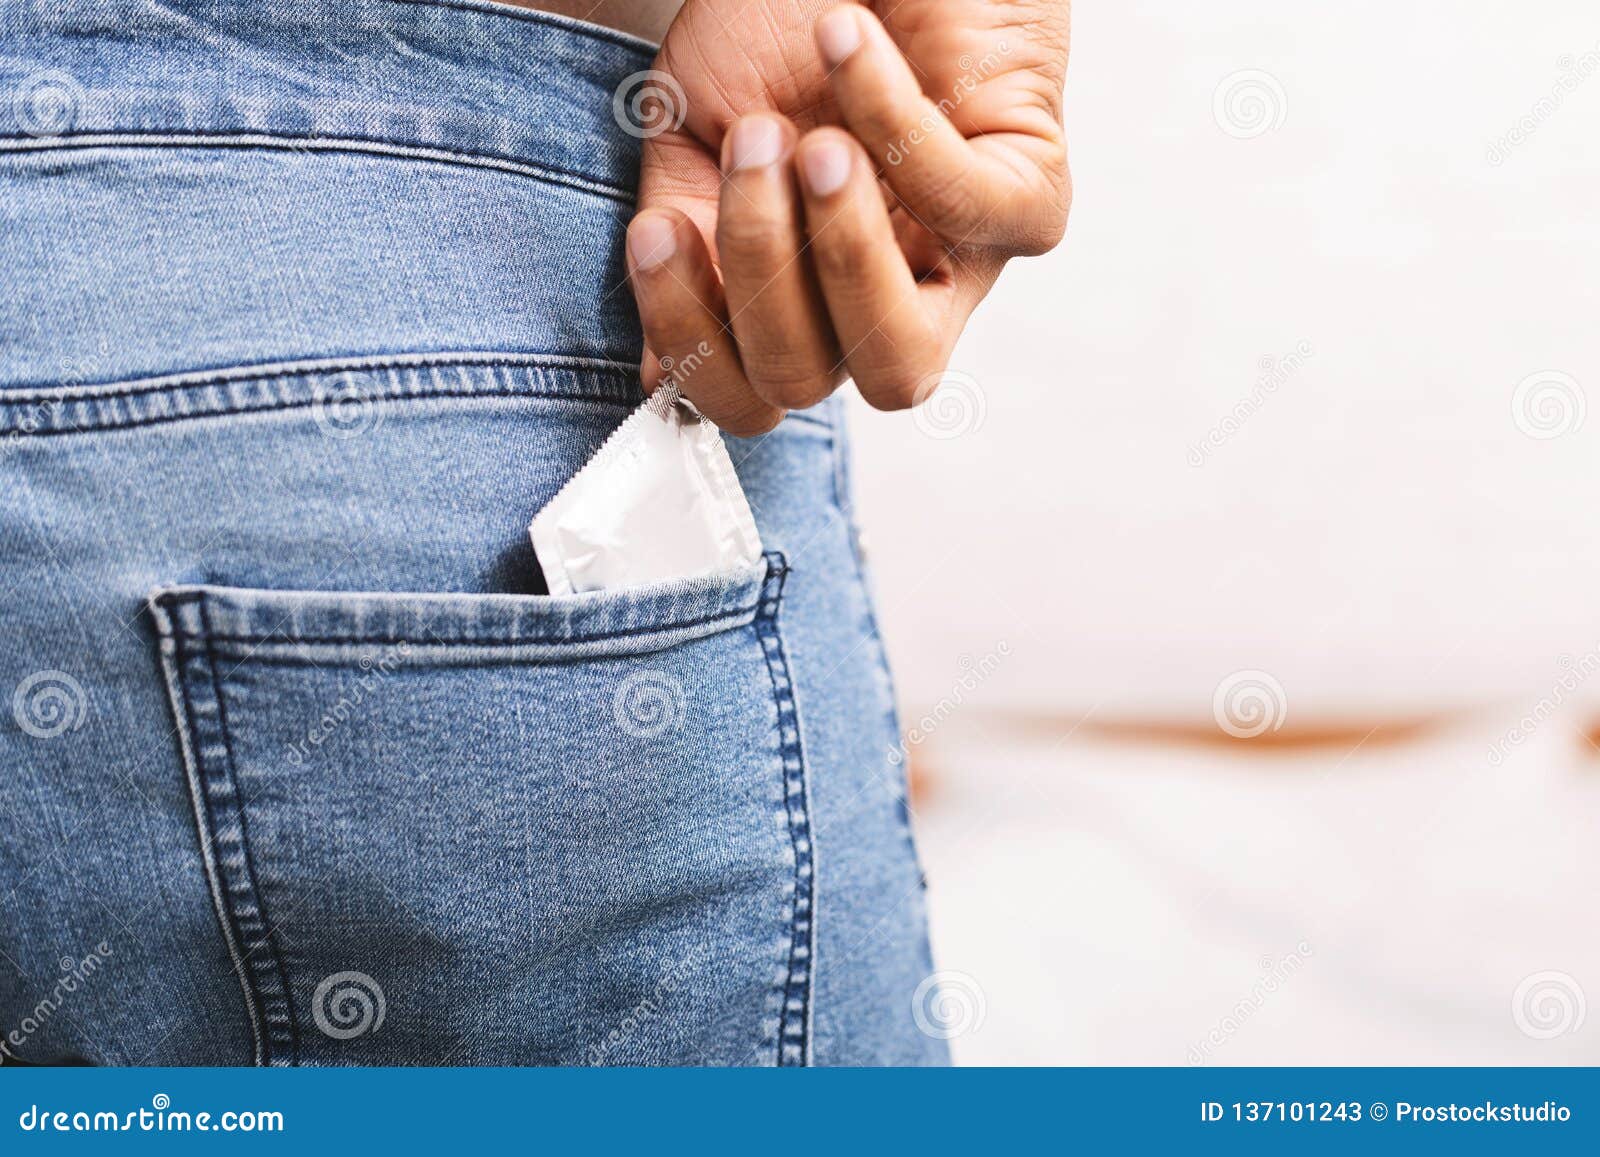 Man Taking Condom from Jeans Back Pocket Stock Image pic